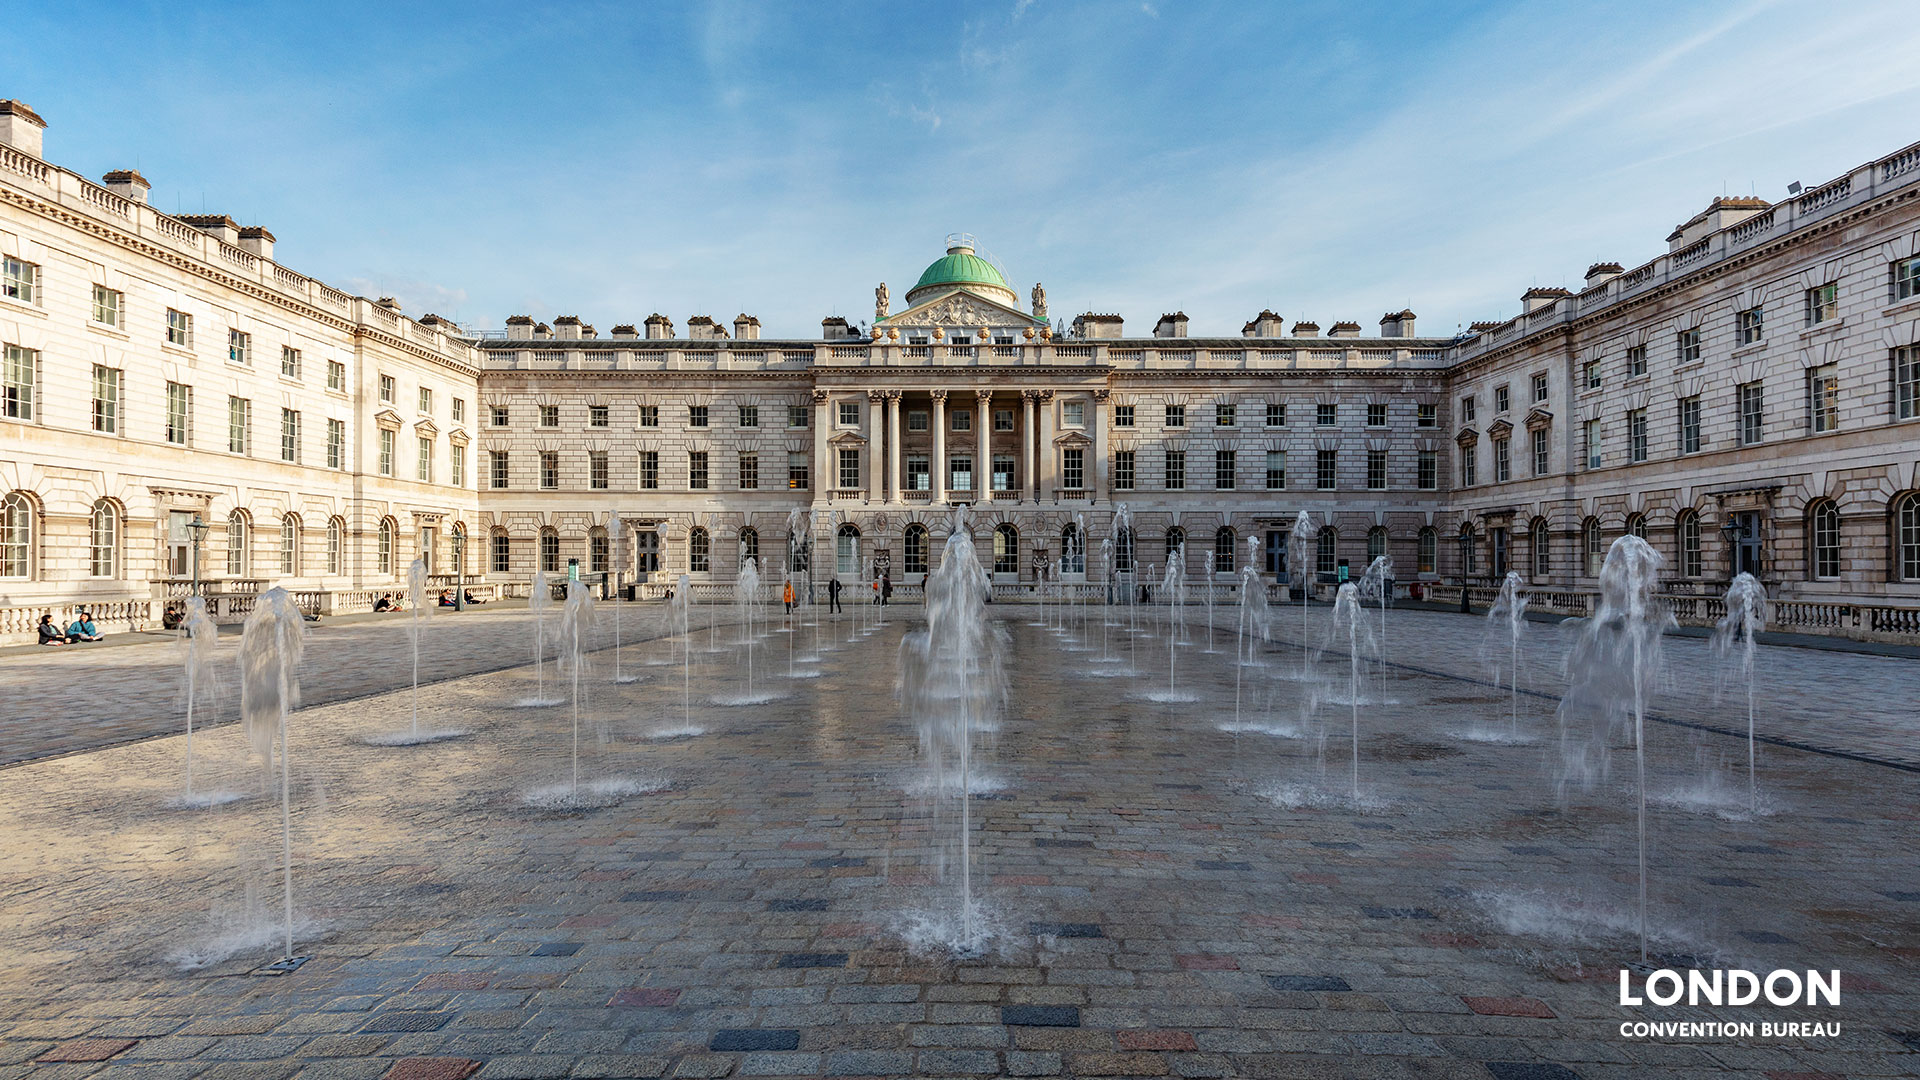 Small symmetrical fountains from the ground are surrounded by the Somerset House building.